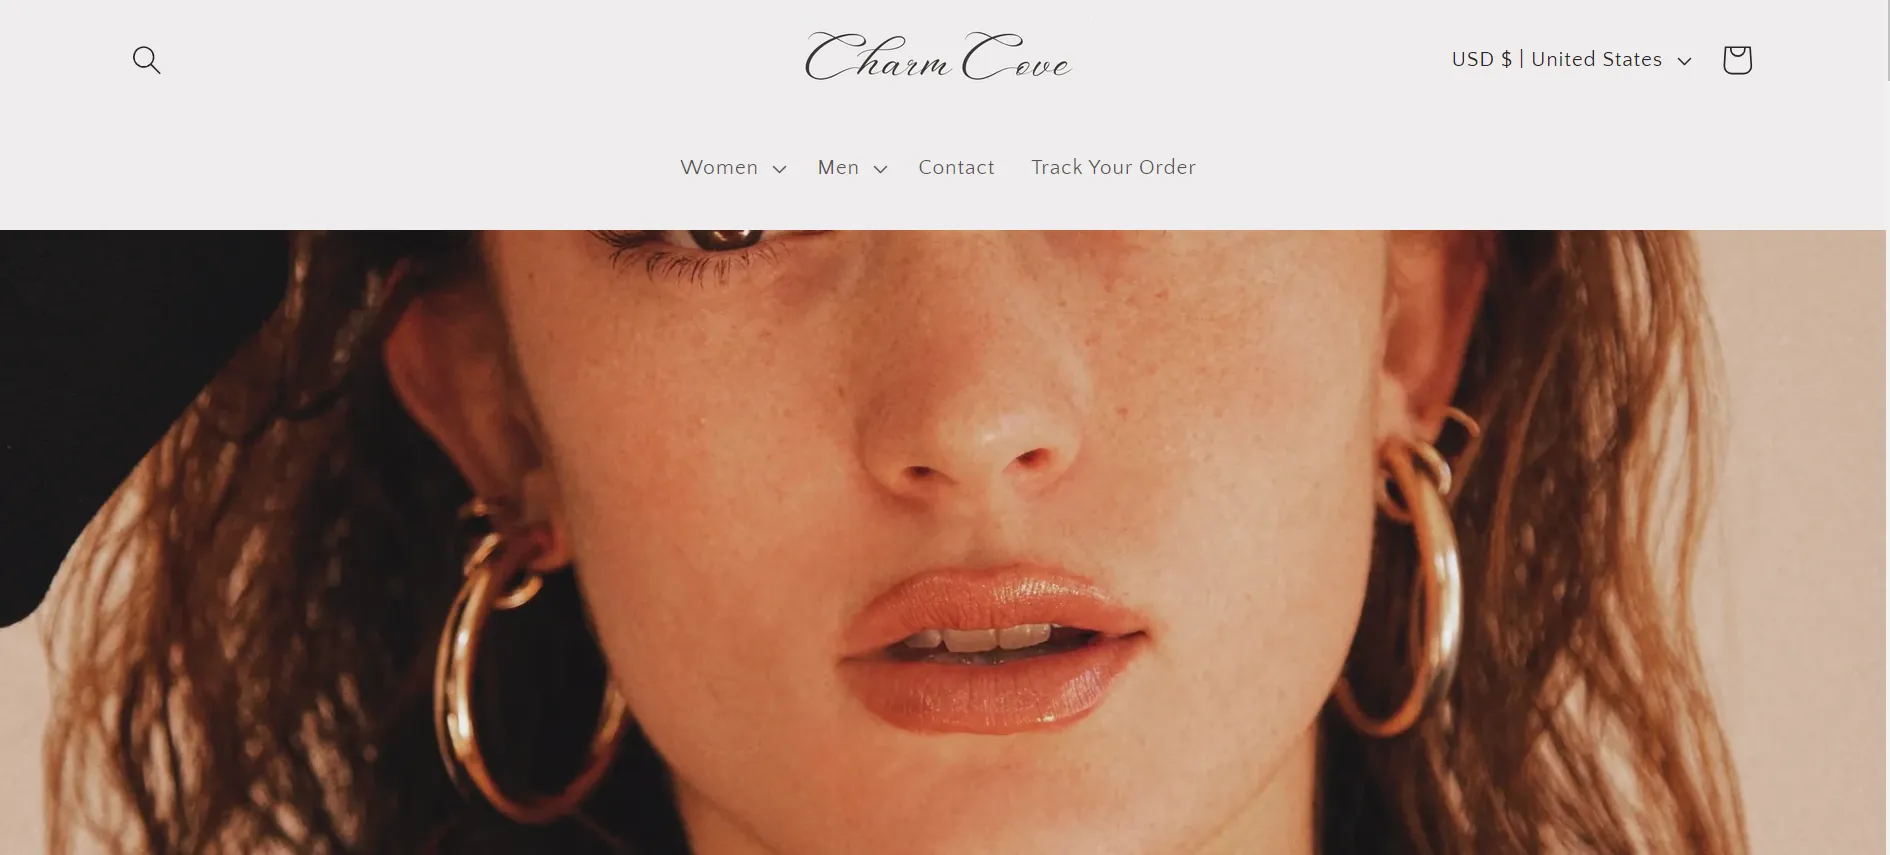 You are currently viewing Charm Cove Scam – Fake Jewelry Shop